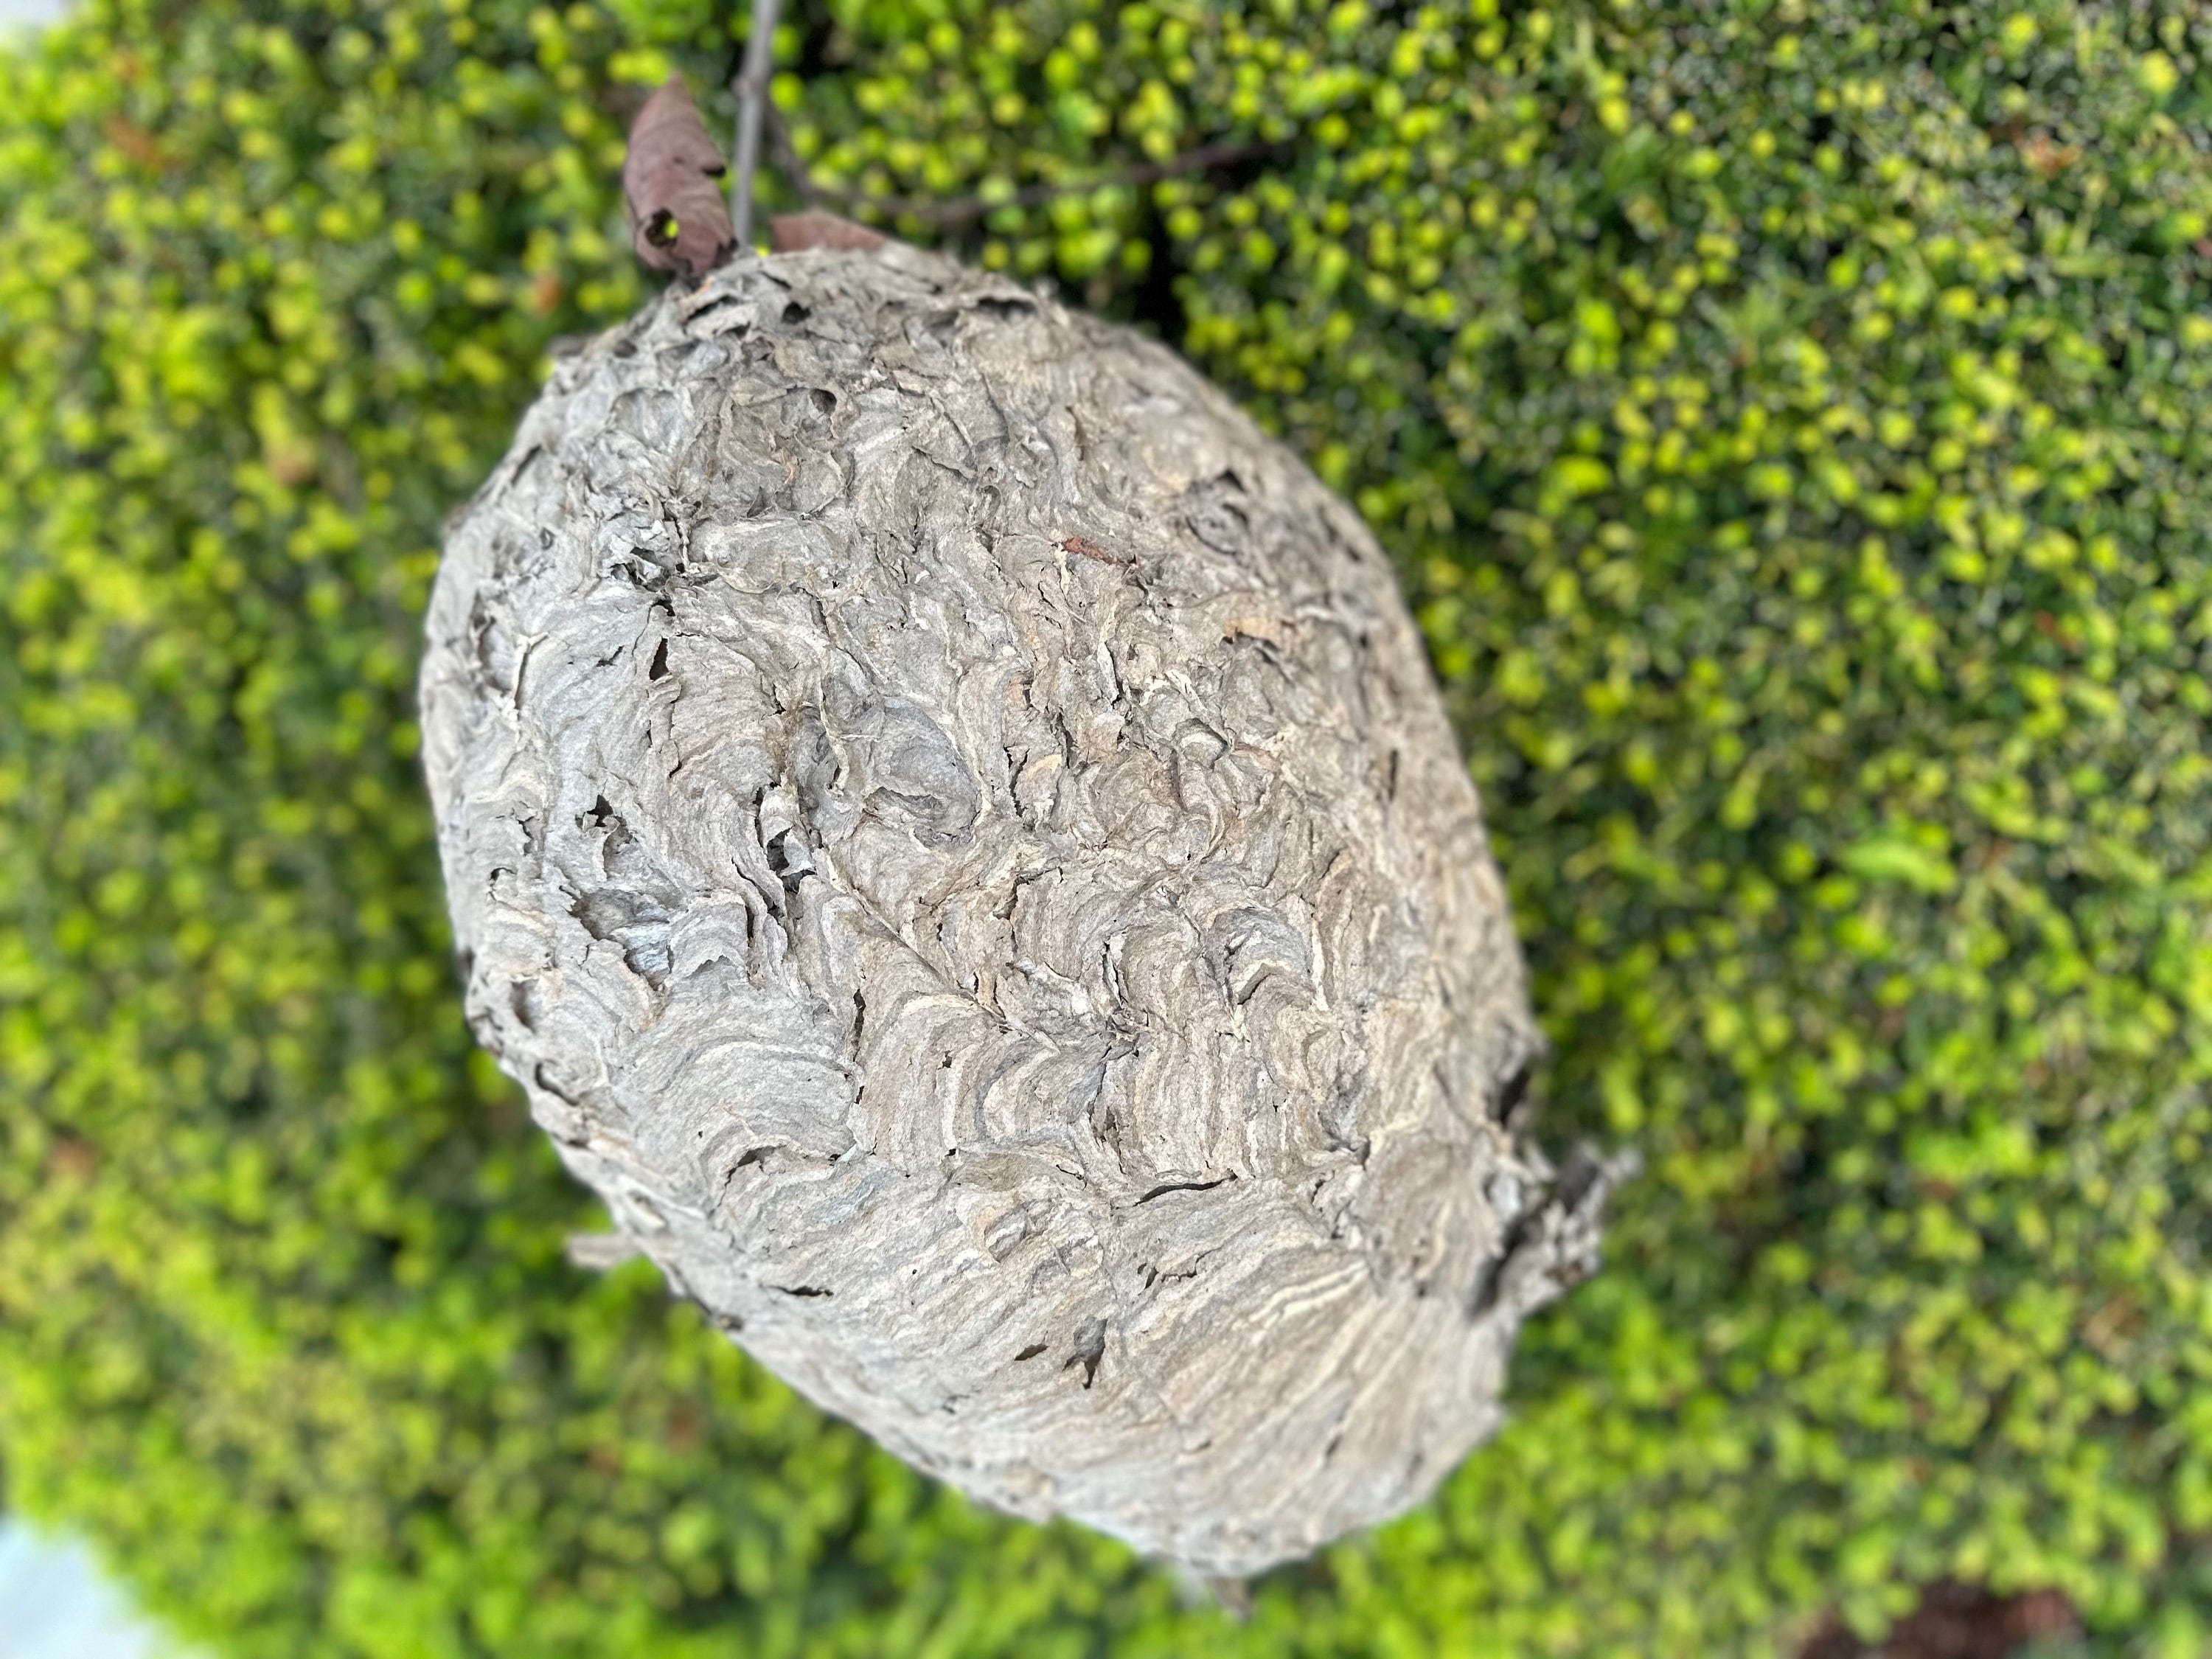 Paper Wasp Nest, Bee Hive in Great Condition, Approximately 13 Inches Tall by 9 Inches Wide and 9 Inches High